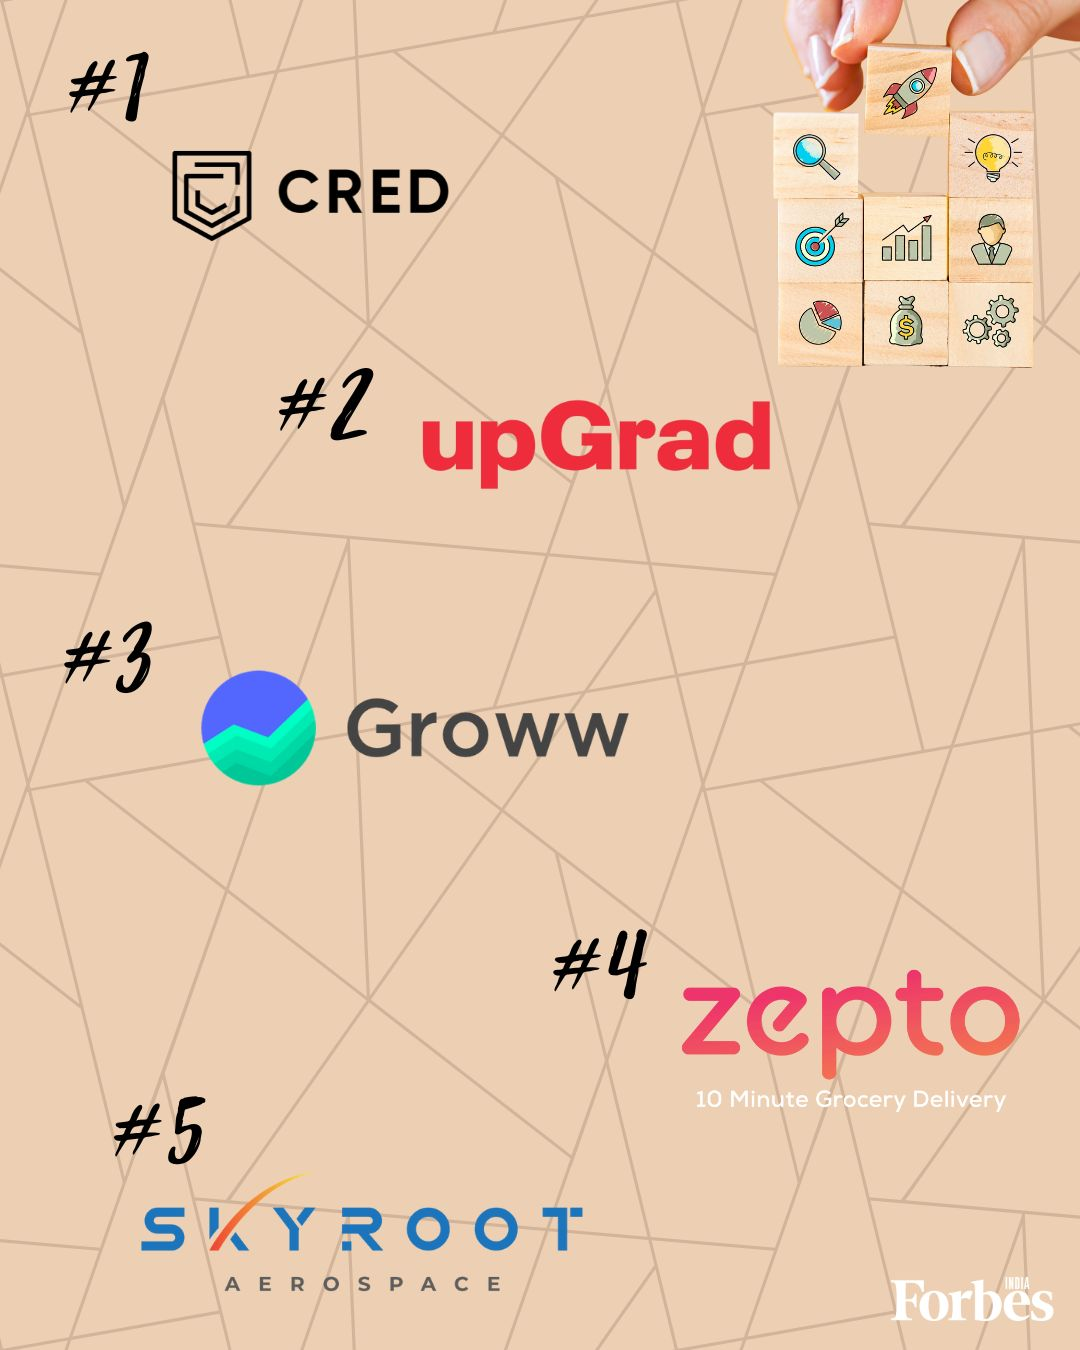 The image showcases Cred's first position in the top 10 indian startups 2022